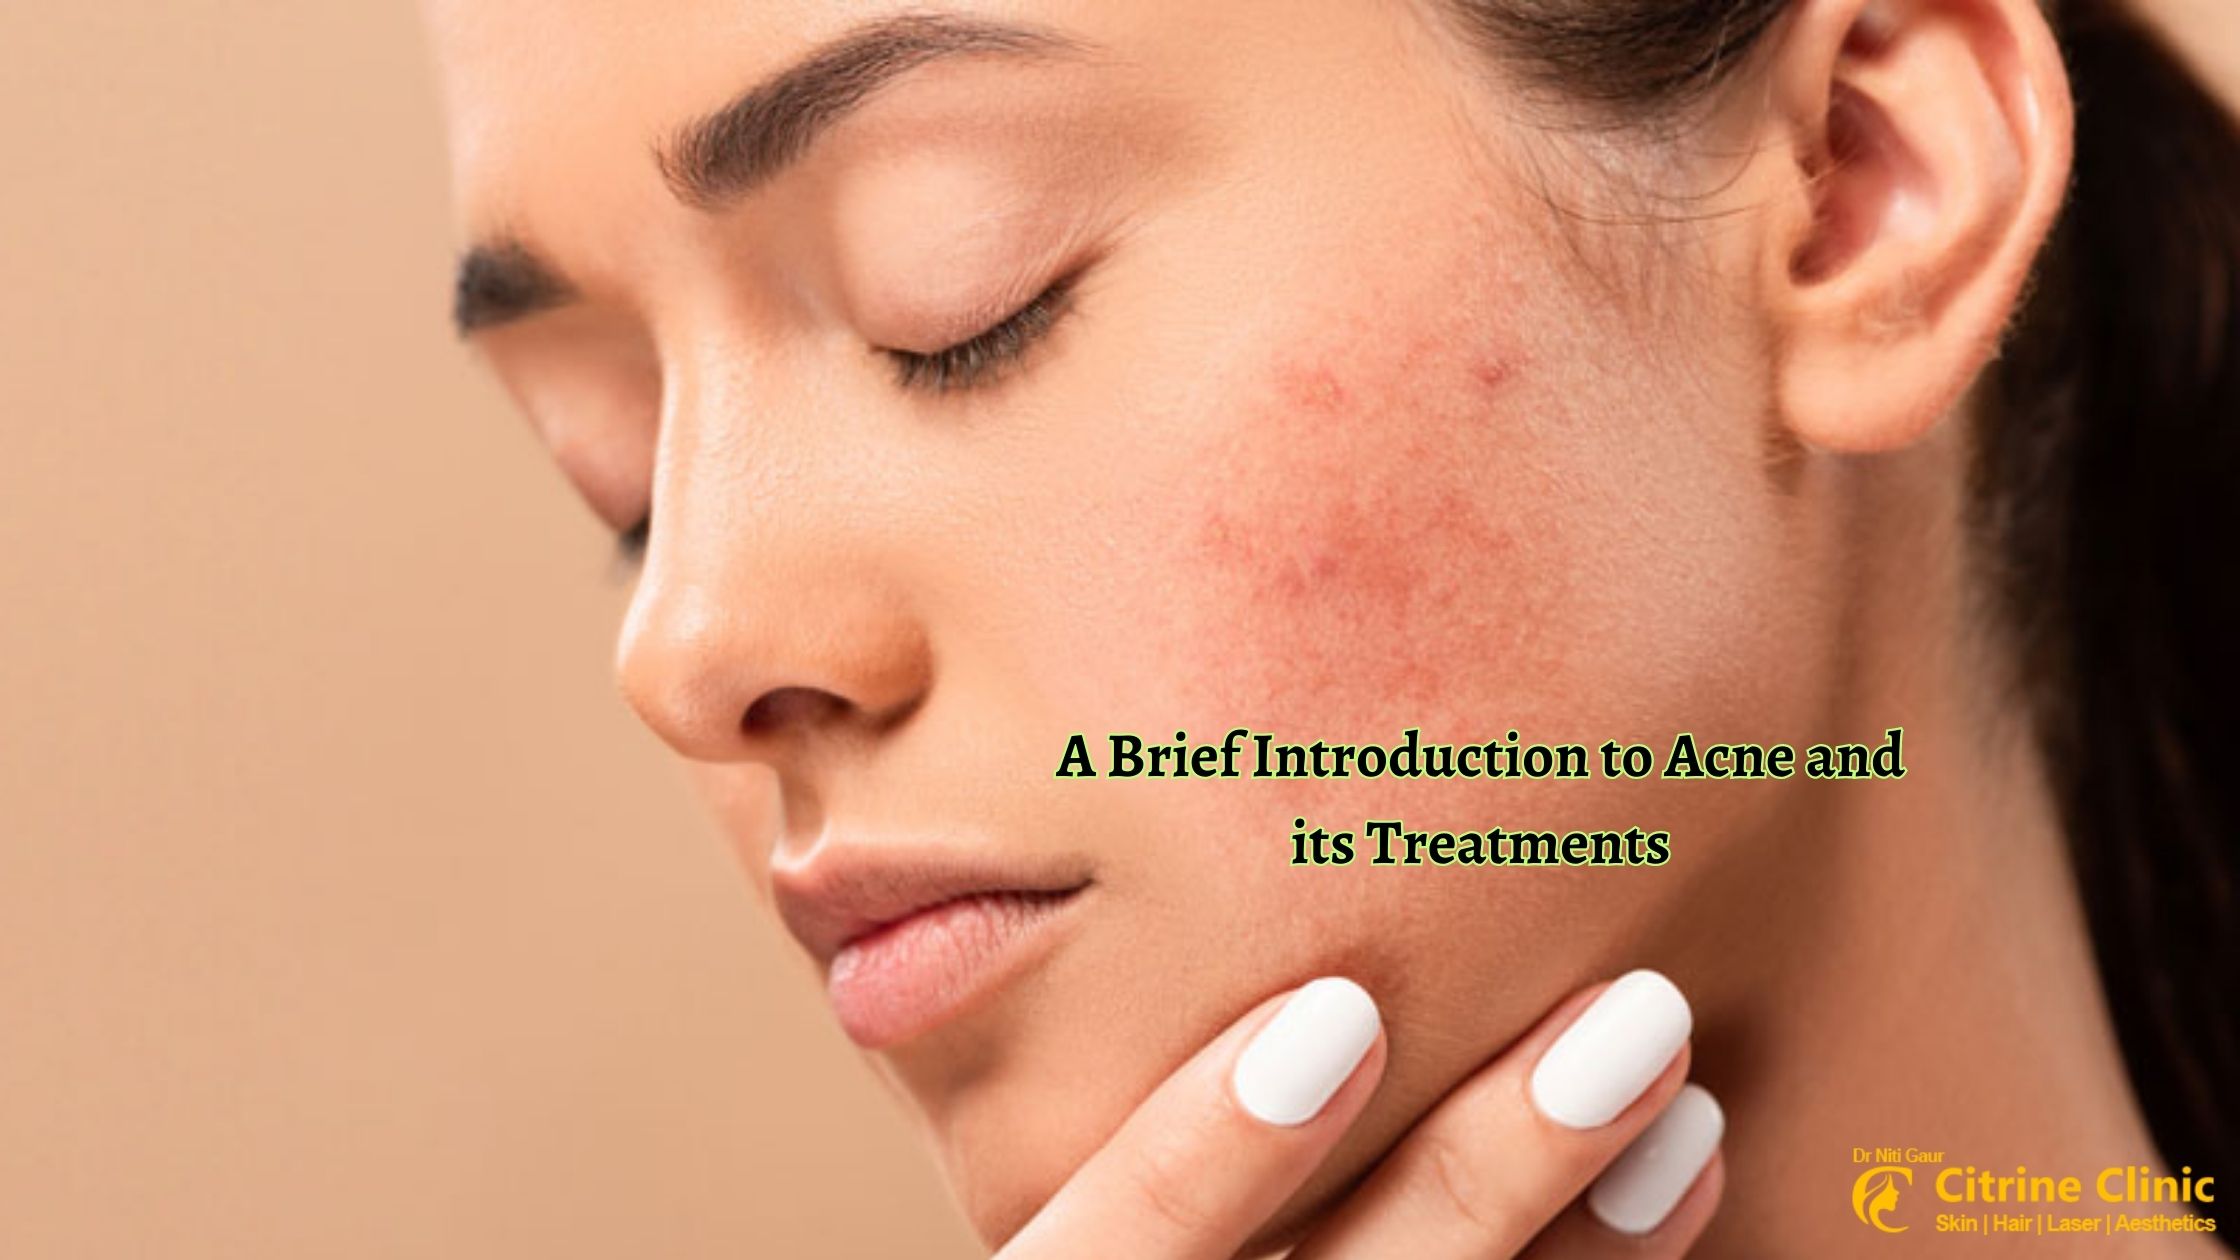 A Brief Introduction to Acne and its Treatments